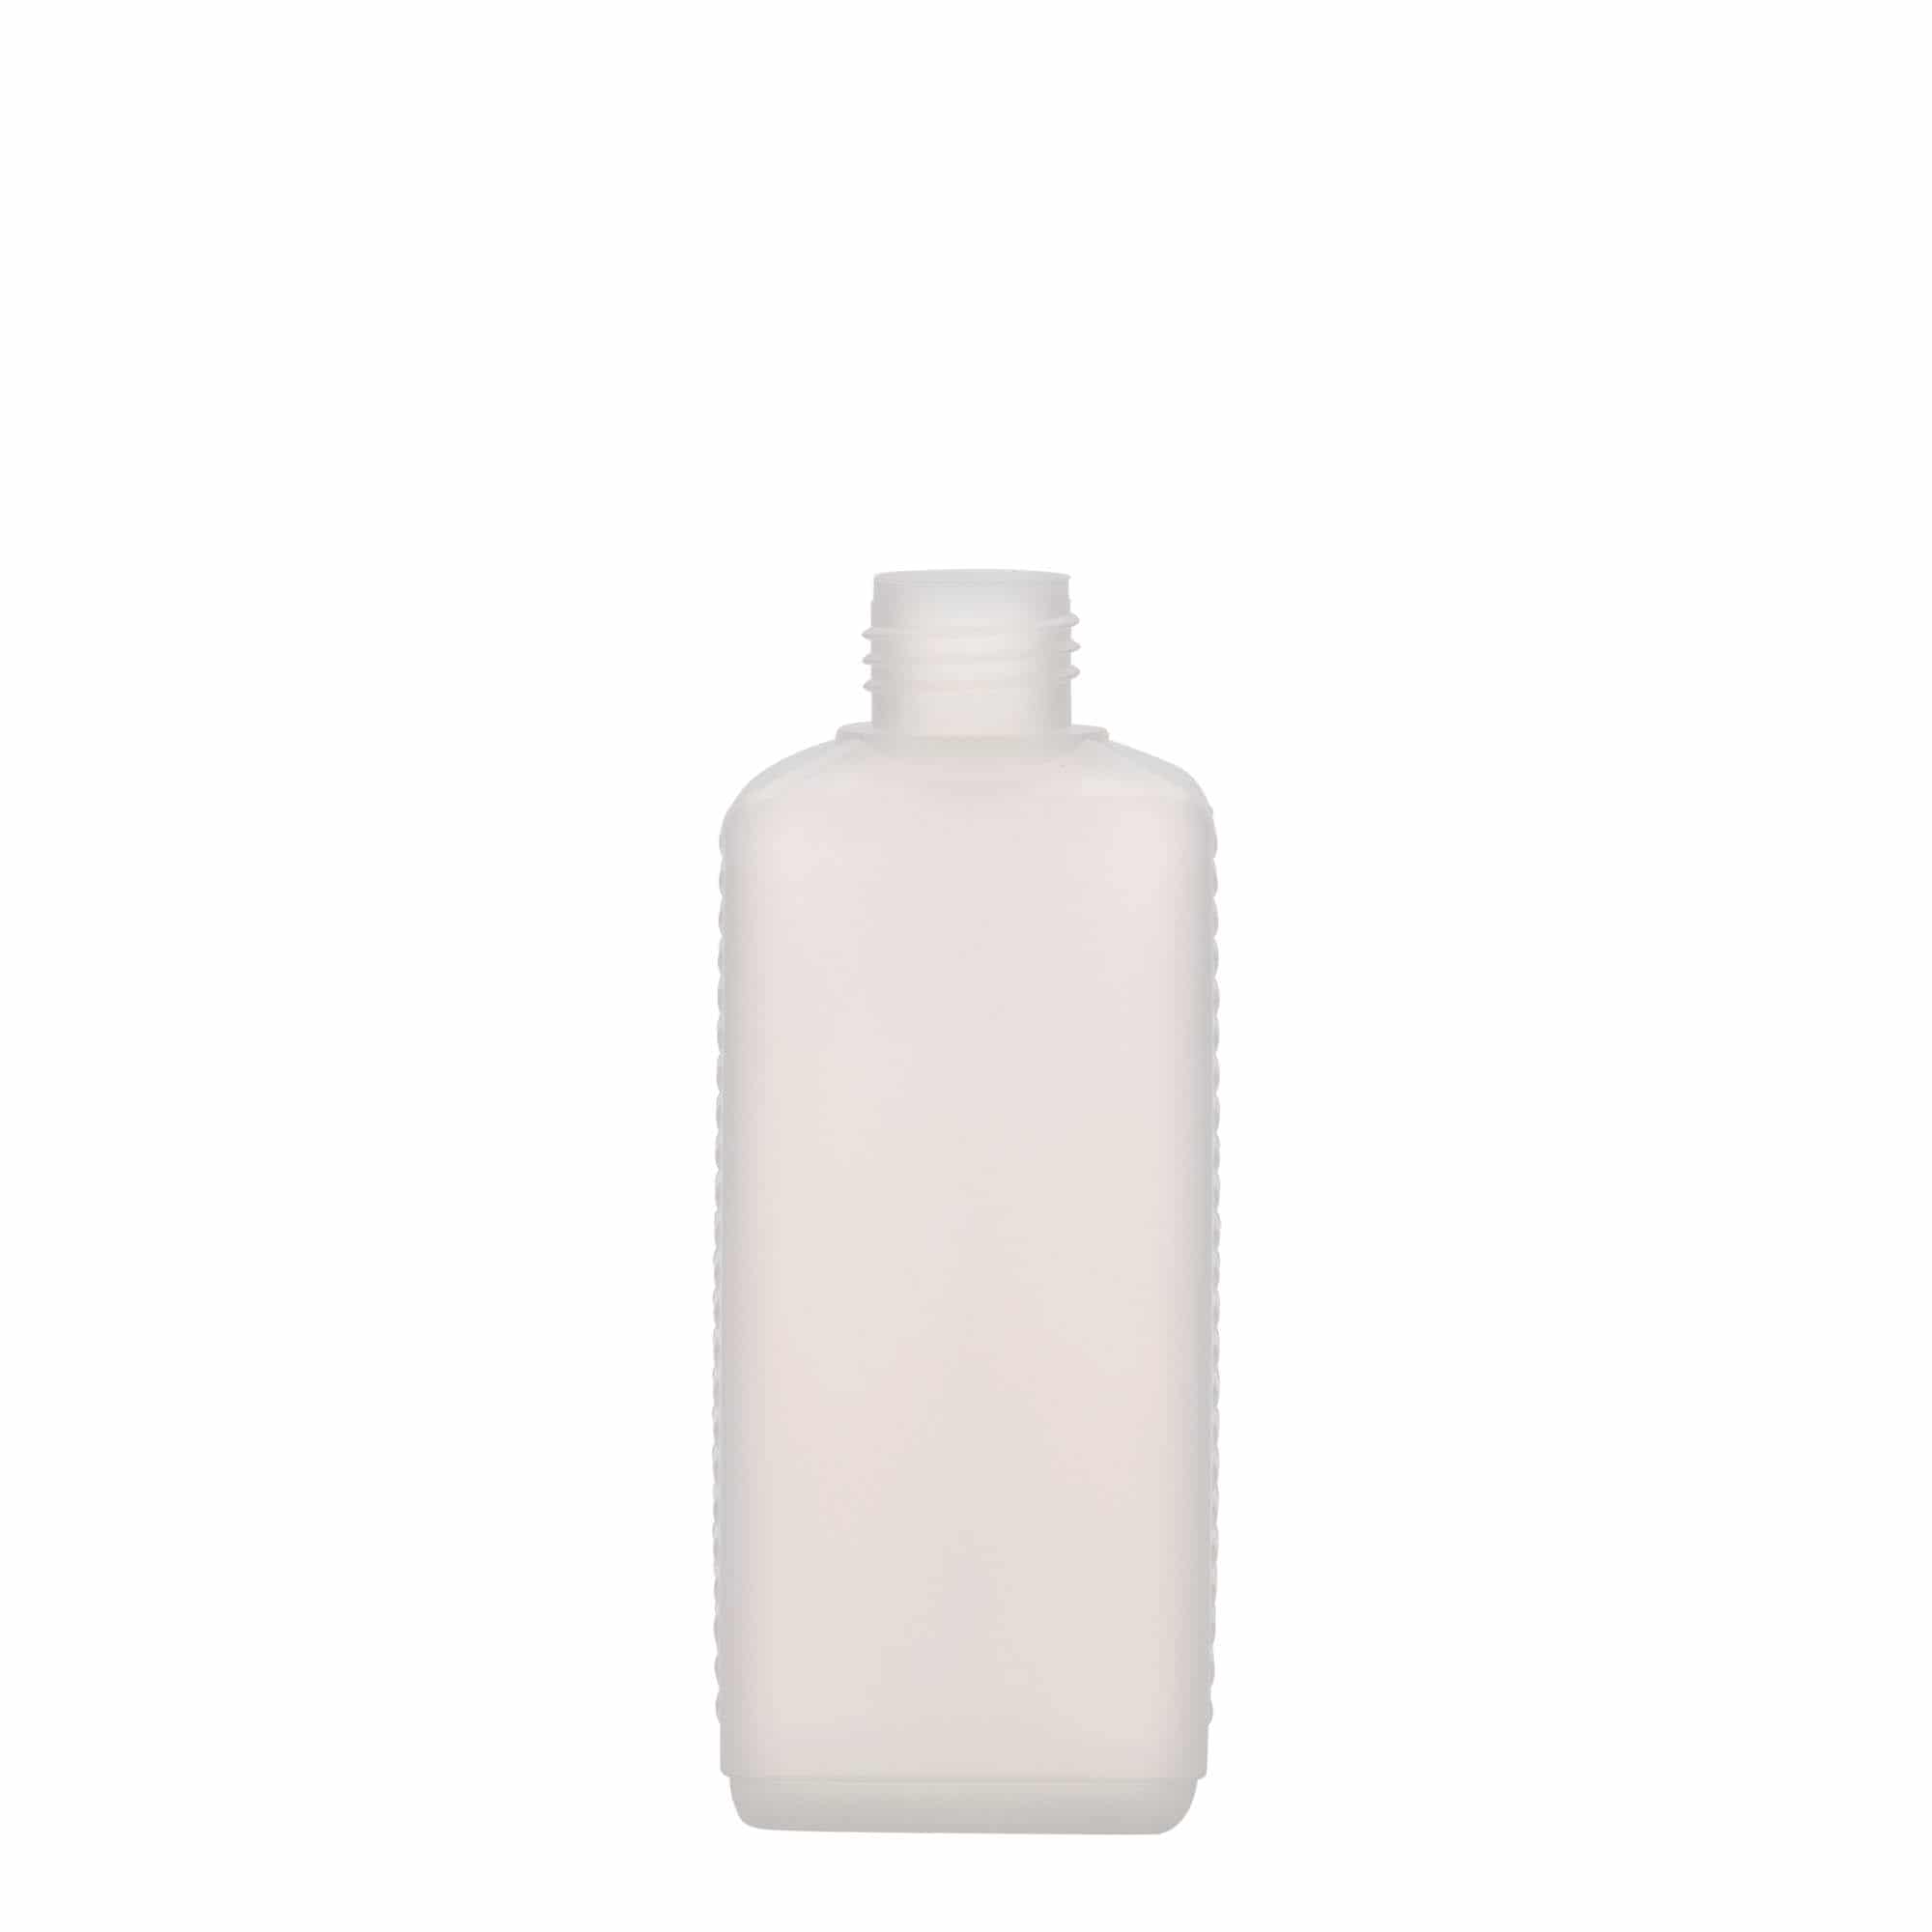 250 ml canister bottle, rectangular, HDPE plastic, natural, closure: DIN 25 EPE